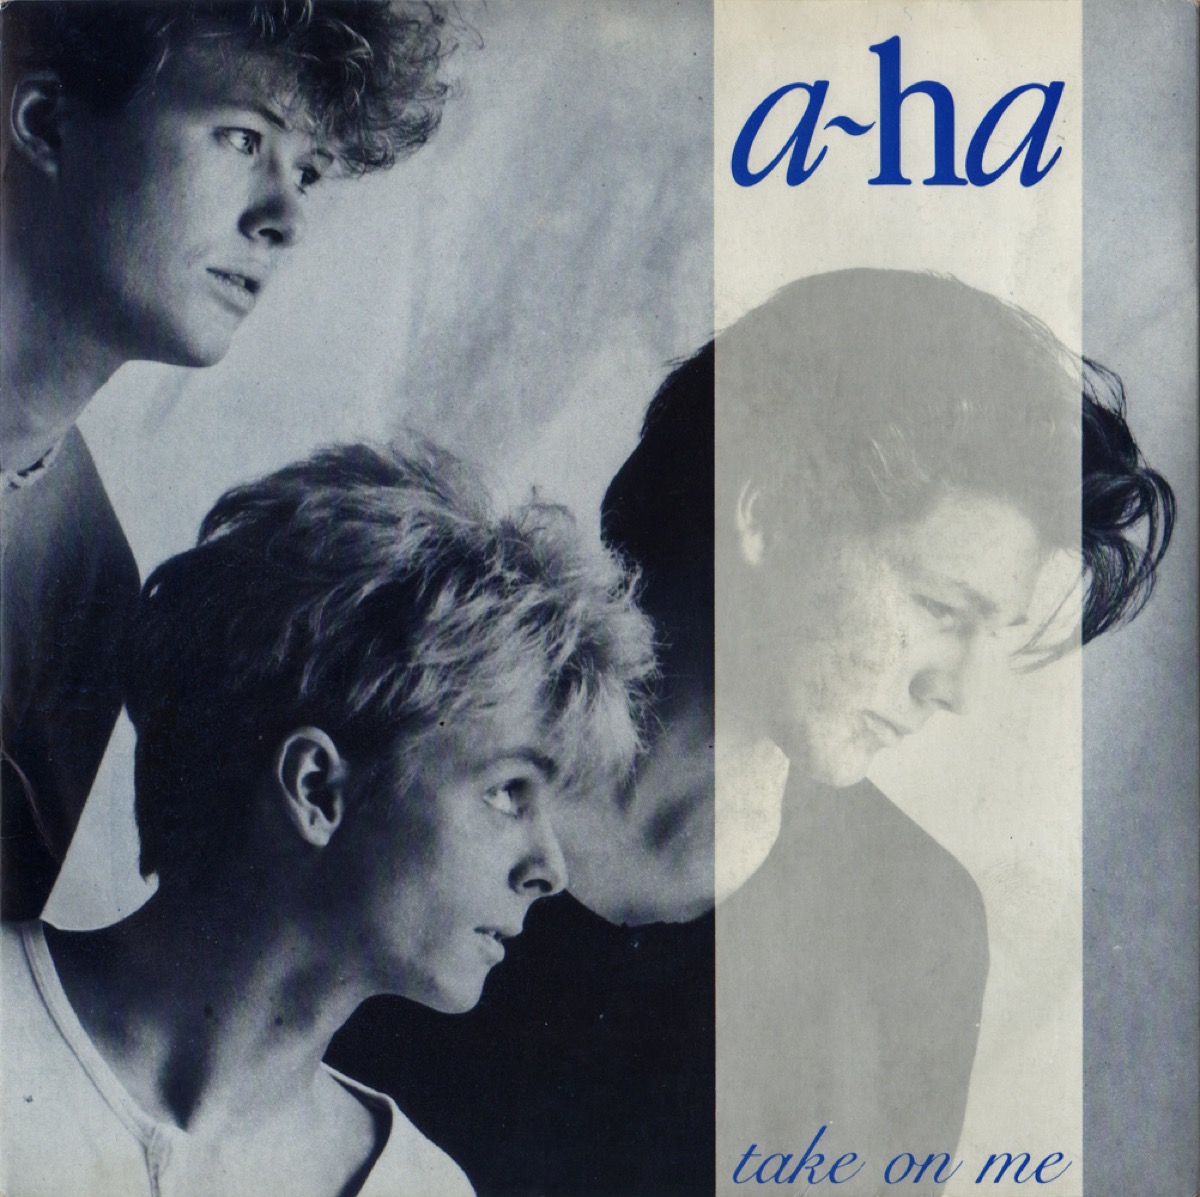 Single cover art for "Take on Me" by A-ha